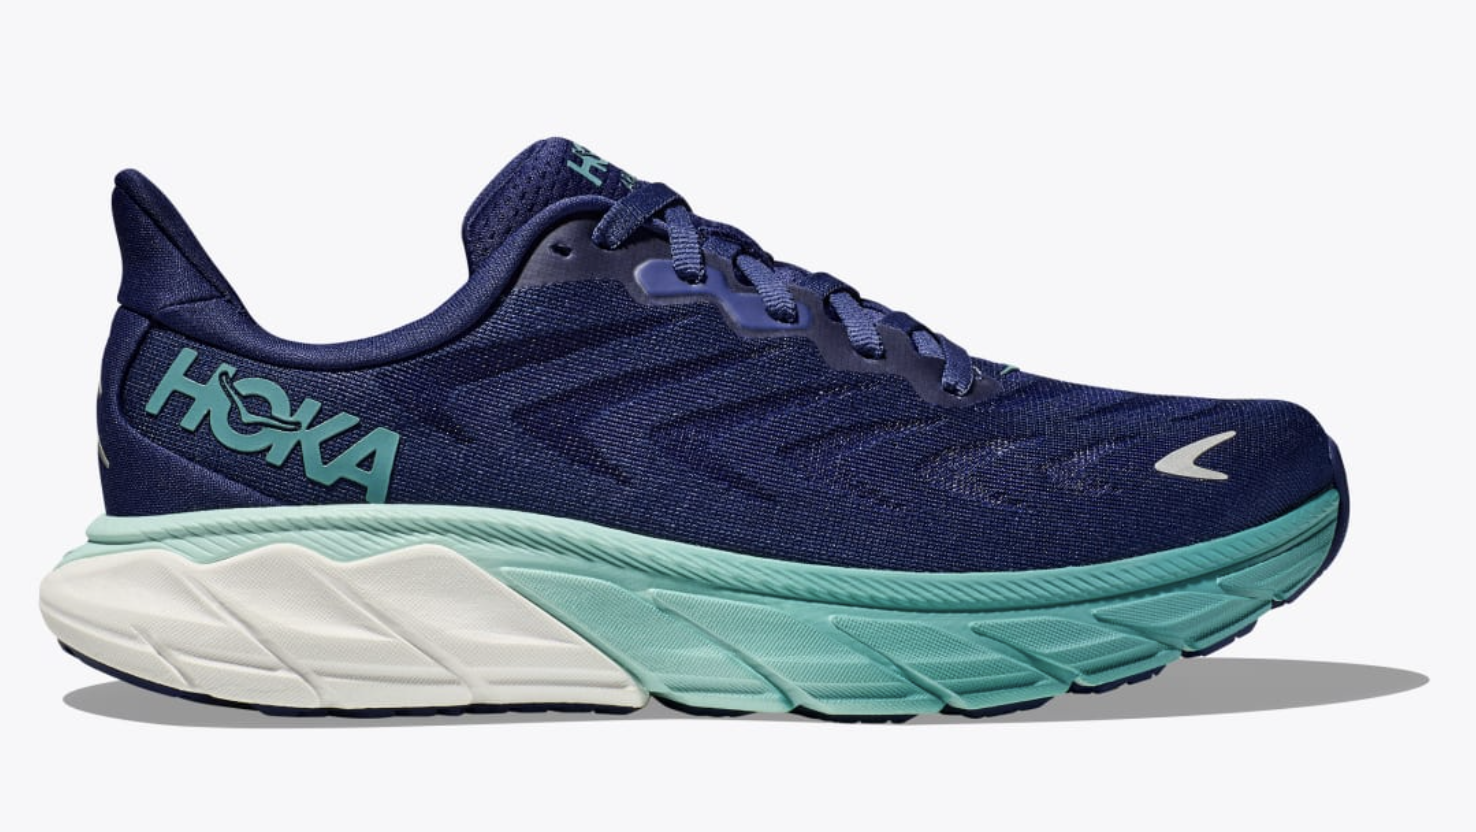 <p><strong>$140.00</strong></p><p>Hoka is the shoe brand of choice for traveling step junkies. I love to explore a new destination on foot, and I credit my Hokas for adding at least 25 percent more steps to my perambulations. They are like walking on clouds. And they’re cute! <em>—I.A.</em></p>